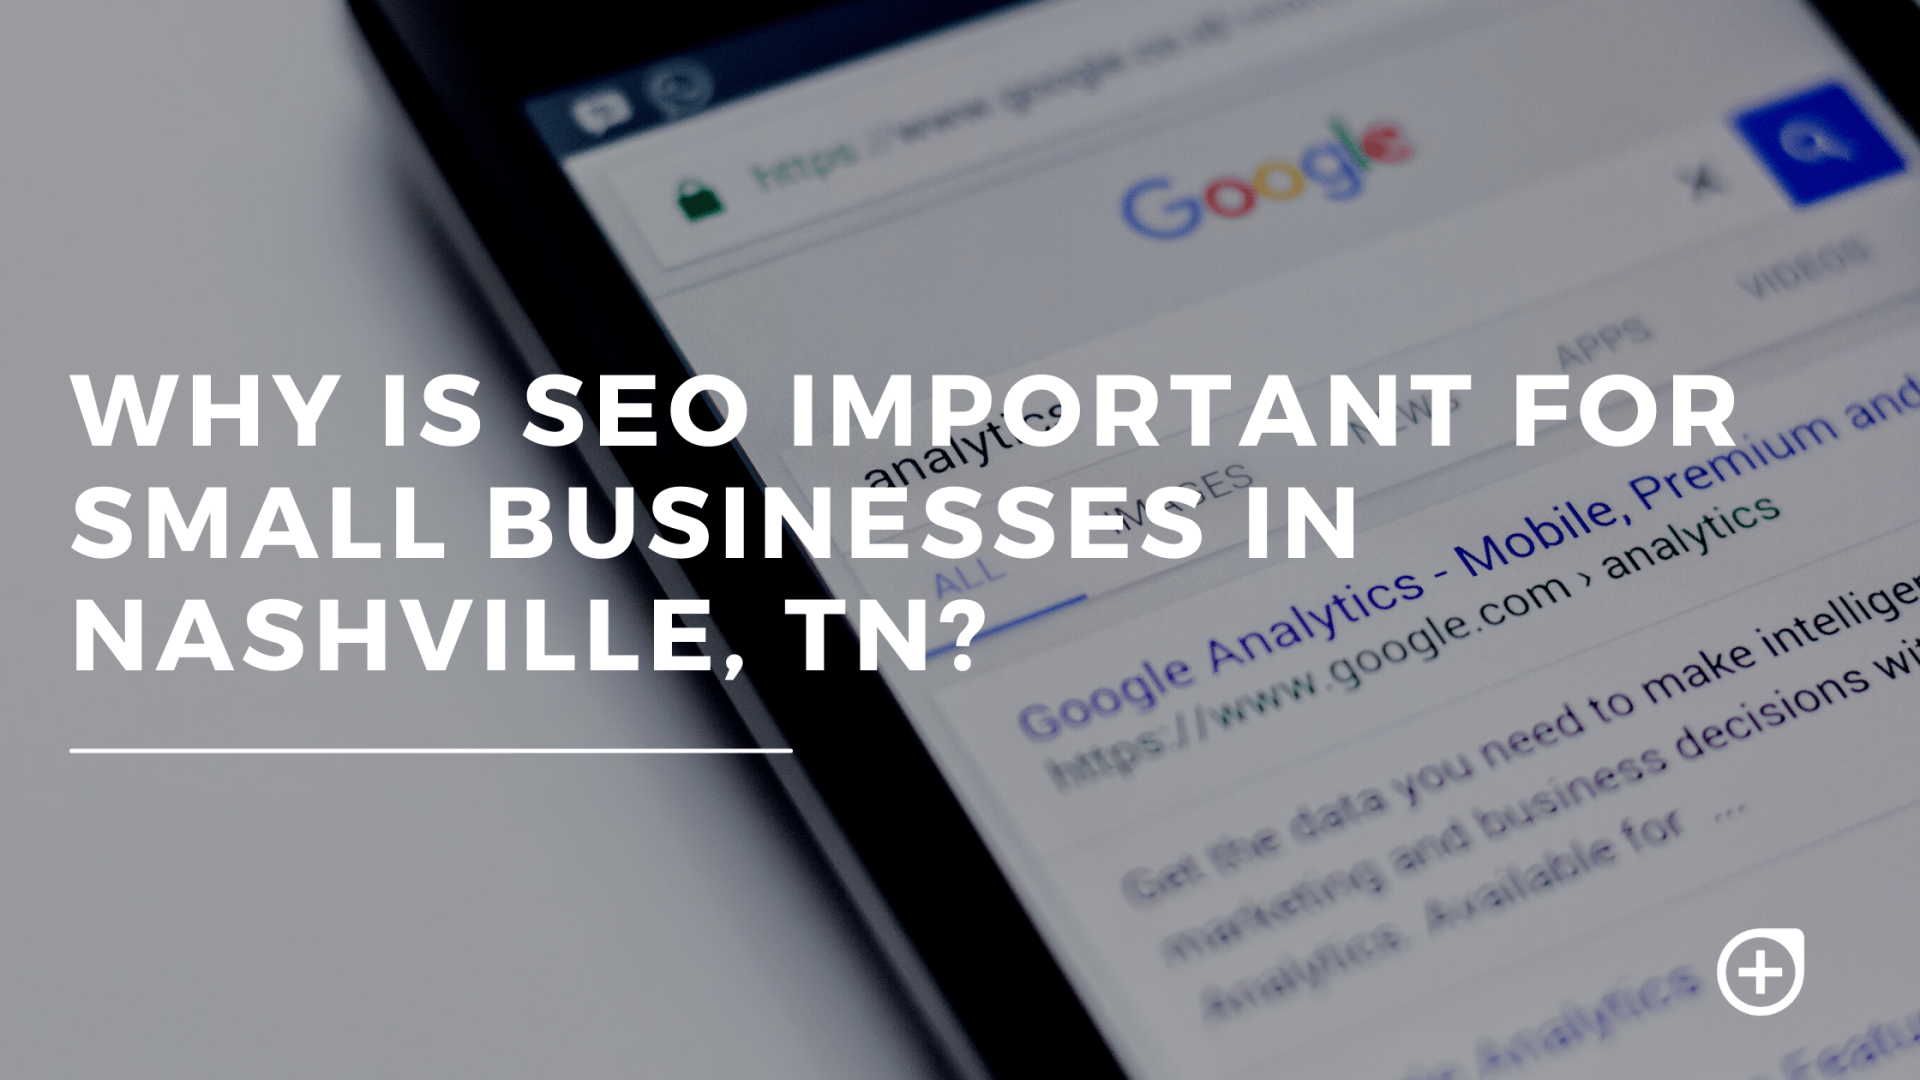 SEO for small businesses in Nashville